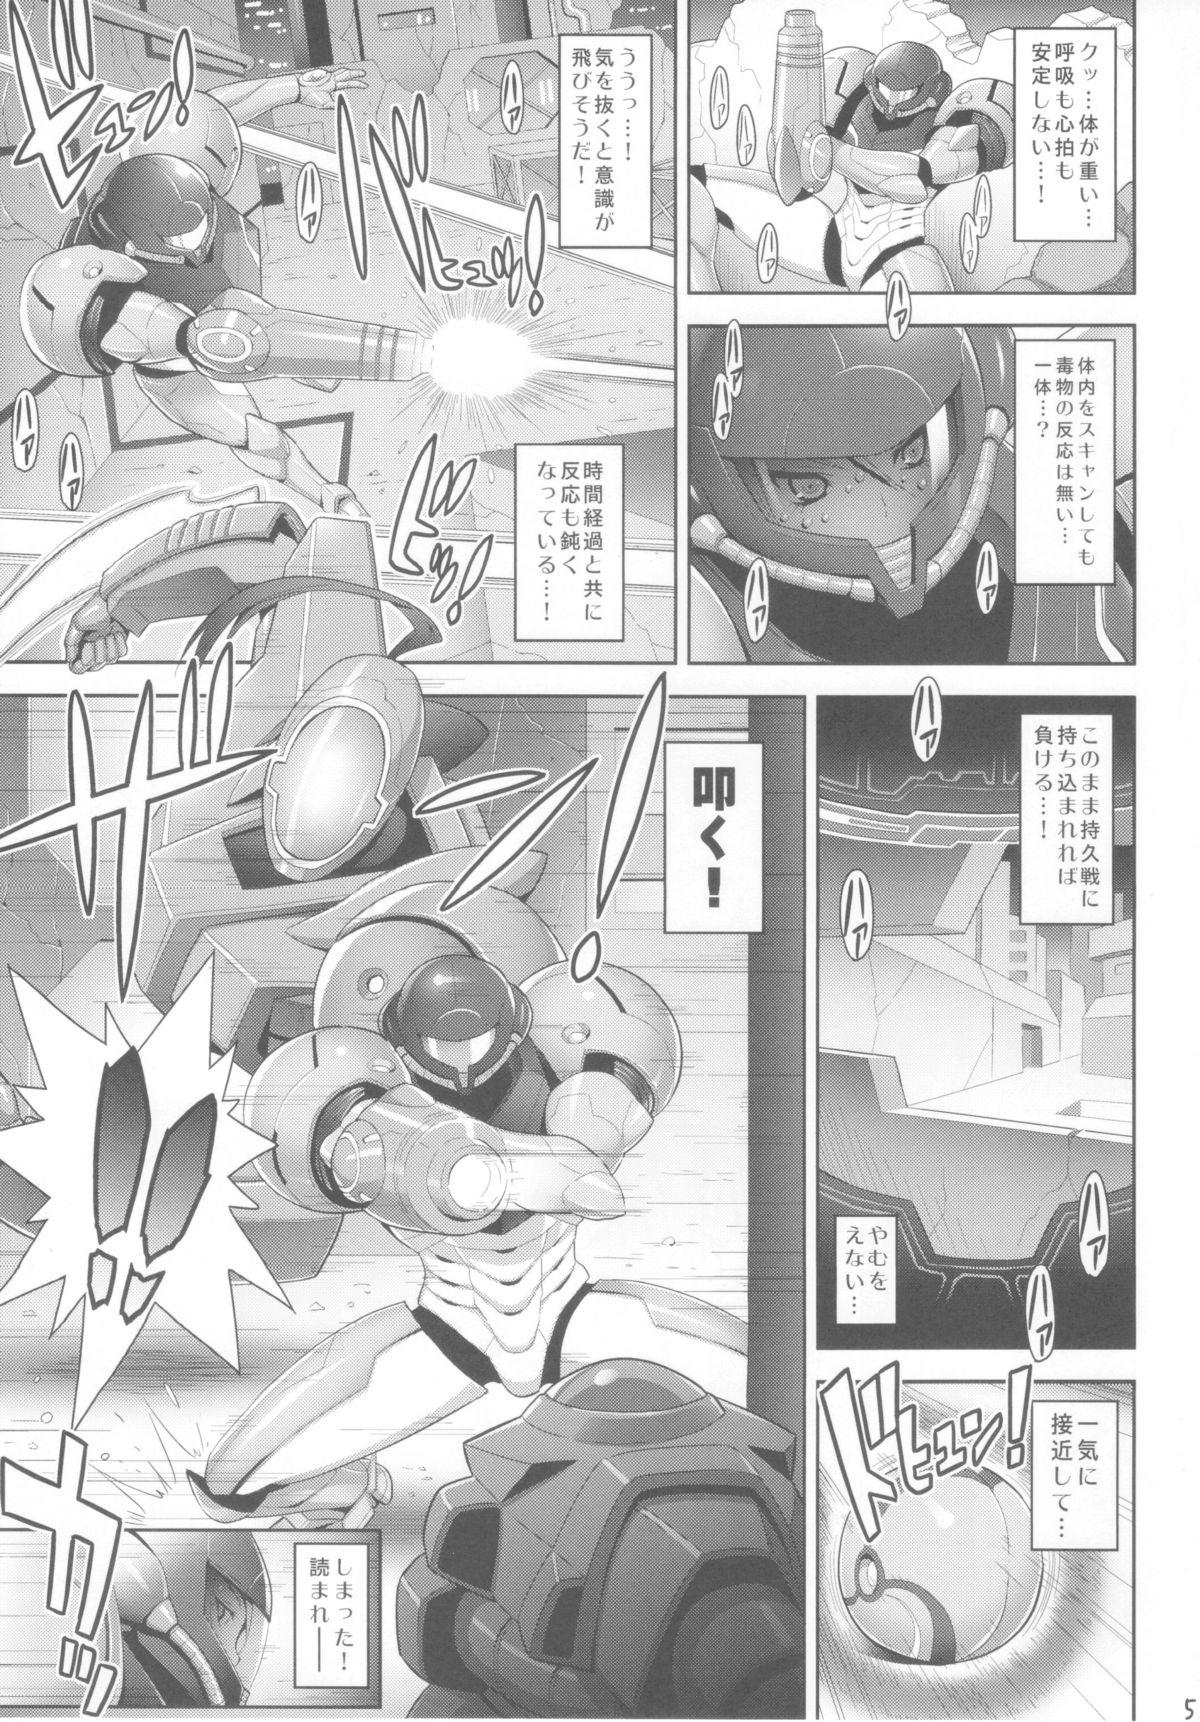 Squirt SPACE REVENGE - Metroid Unshaved - Page 4